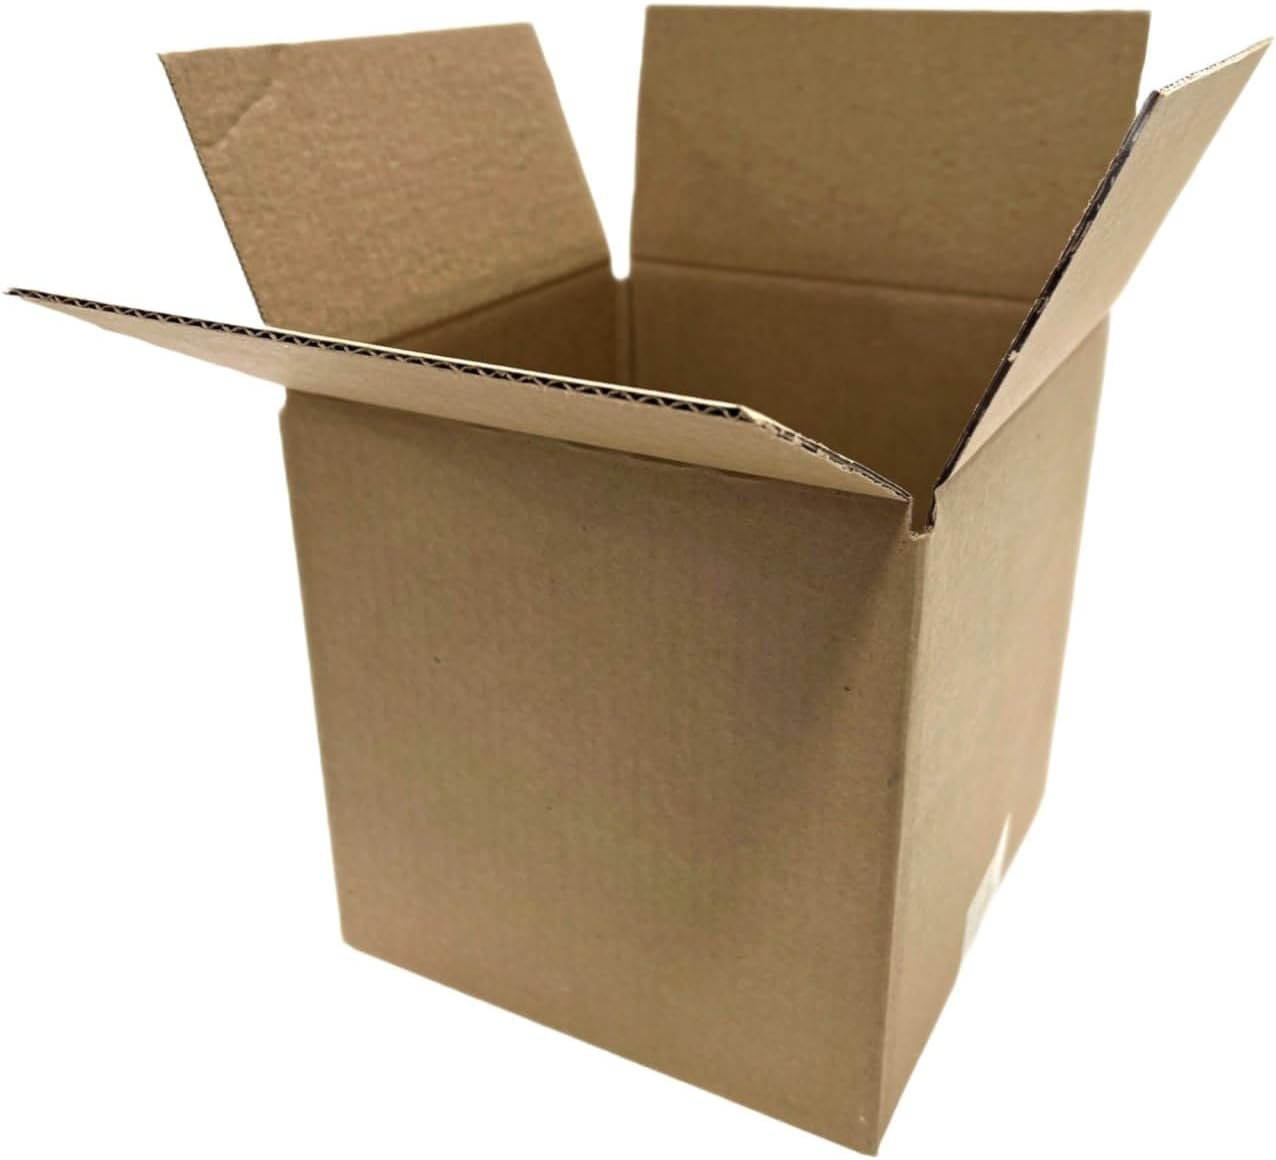 100 8x8x8 Cardboard Paper Boxes Mailing Packing Shipping Box Corrugated Carton